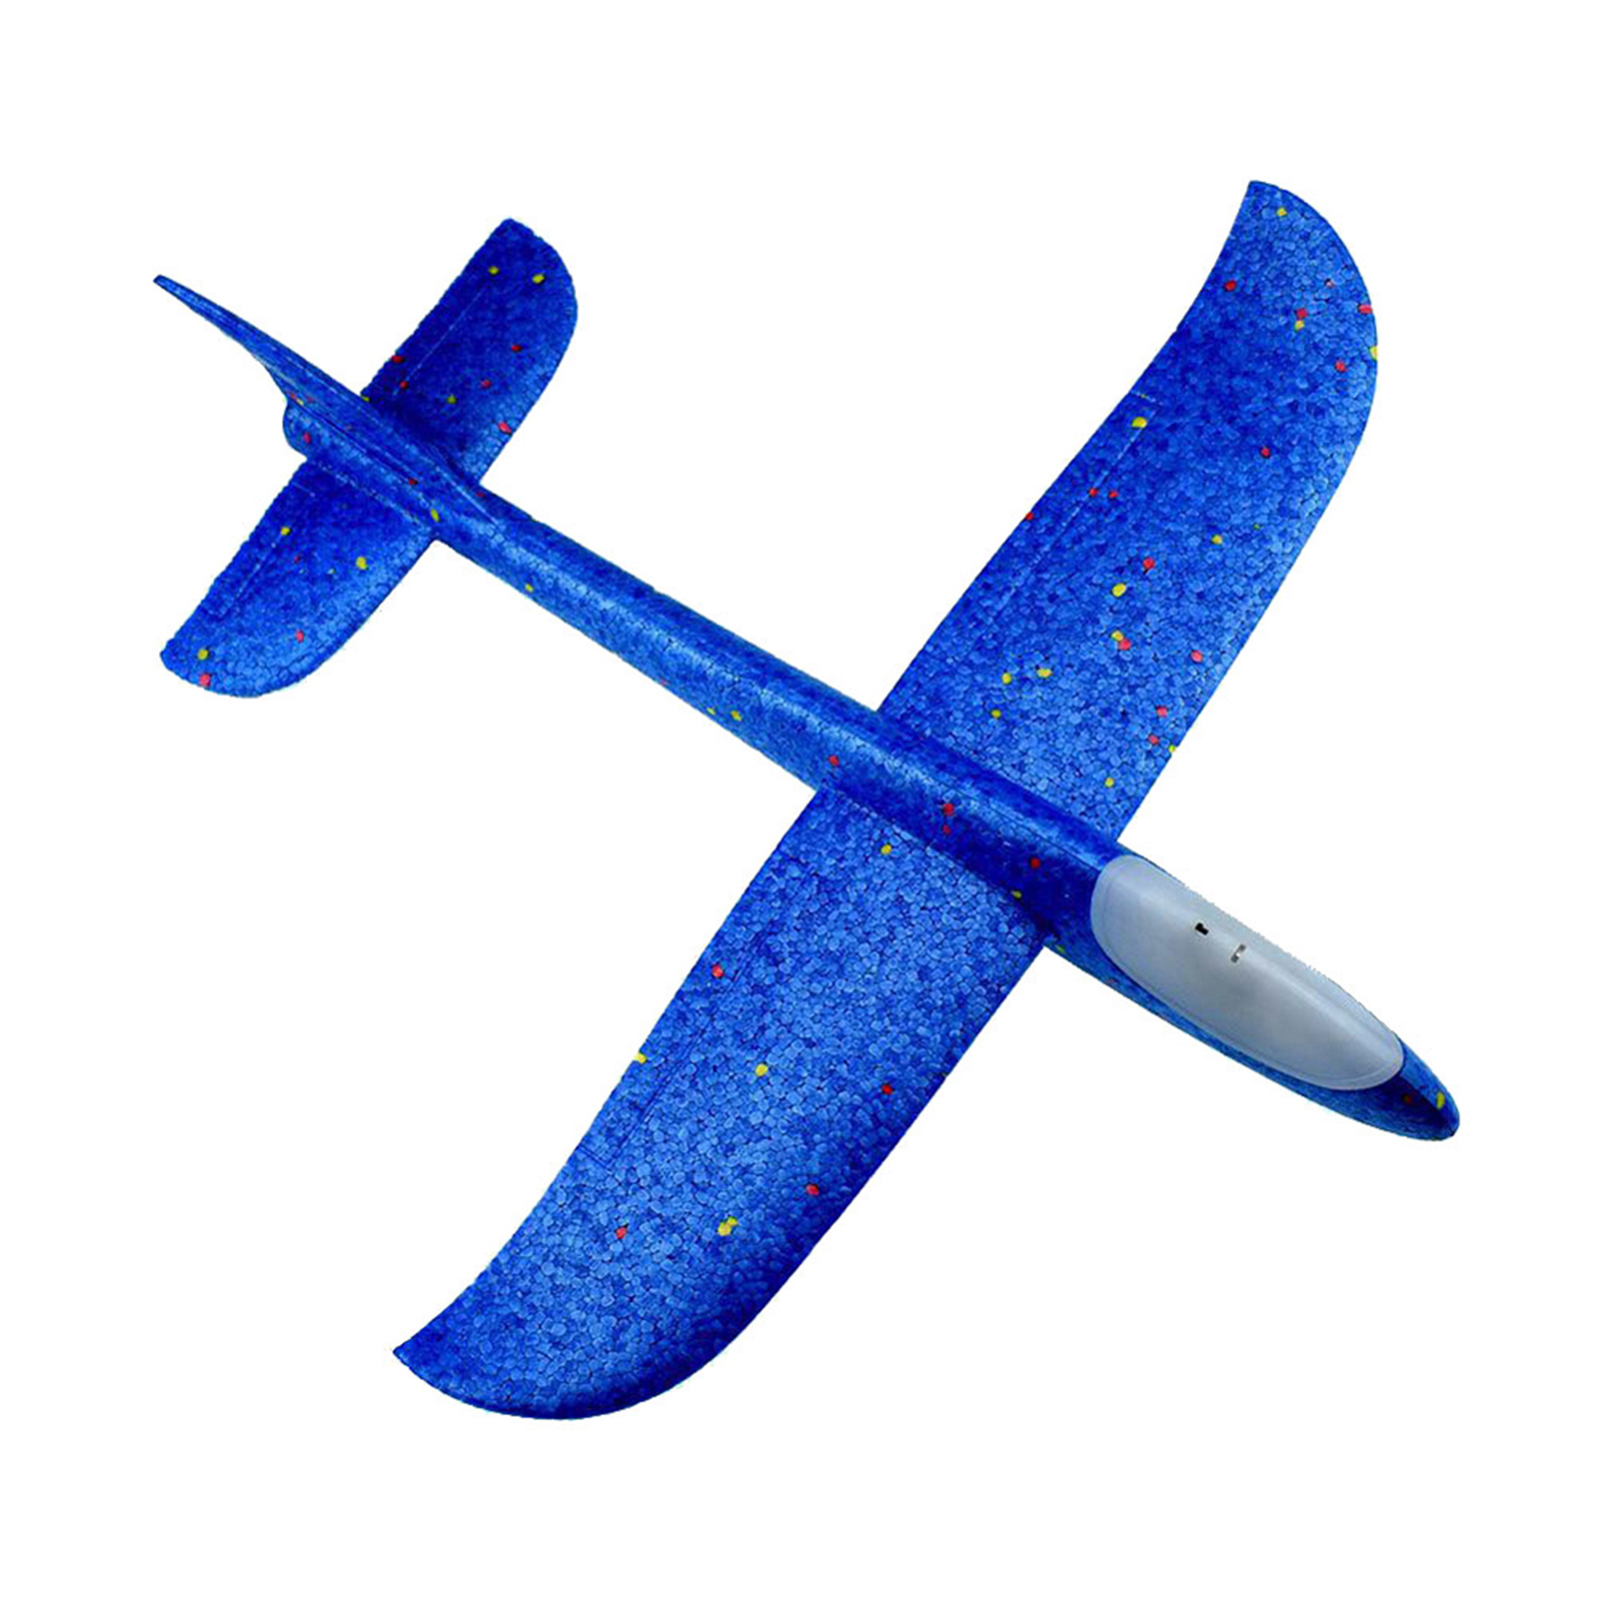 Flying Glider Planes With Flash LED Light 18.9" Foam Flight Mode Throwing Air Plane Aerobatic Airplane Outdoor Sport Game Toys Gift for Kids 3 4 5 6 7 Year Old Boy Blue/Green/Red - image 1 of 6